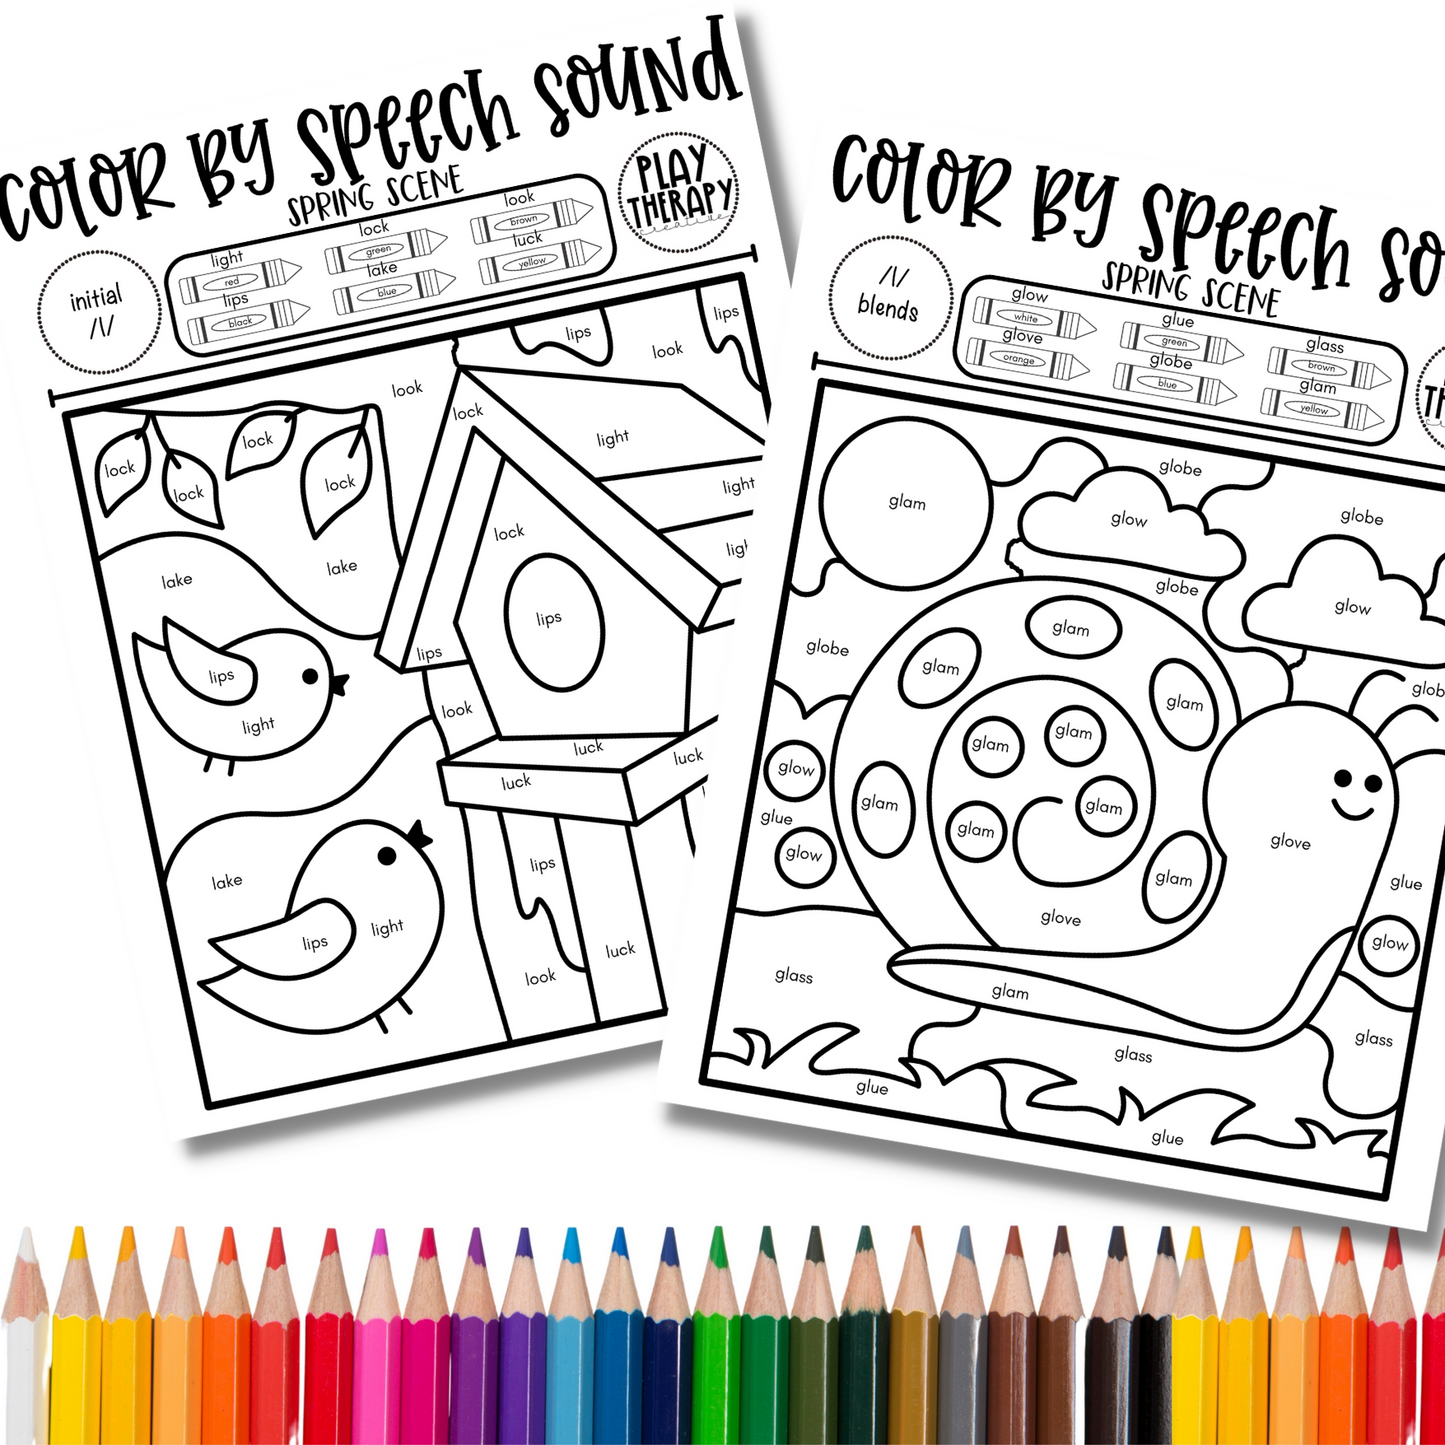 /l/ Sound Spring Themed Color-by-Speech-Sounds for Speech Therapy